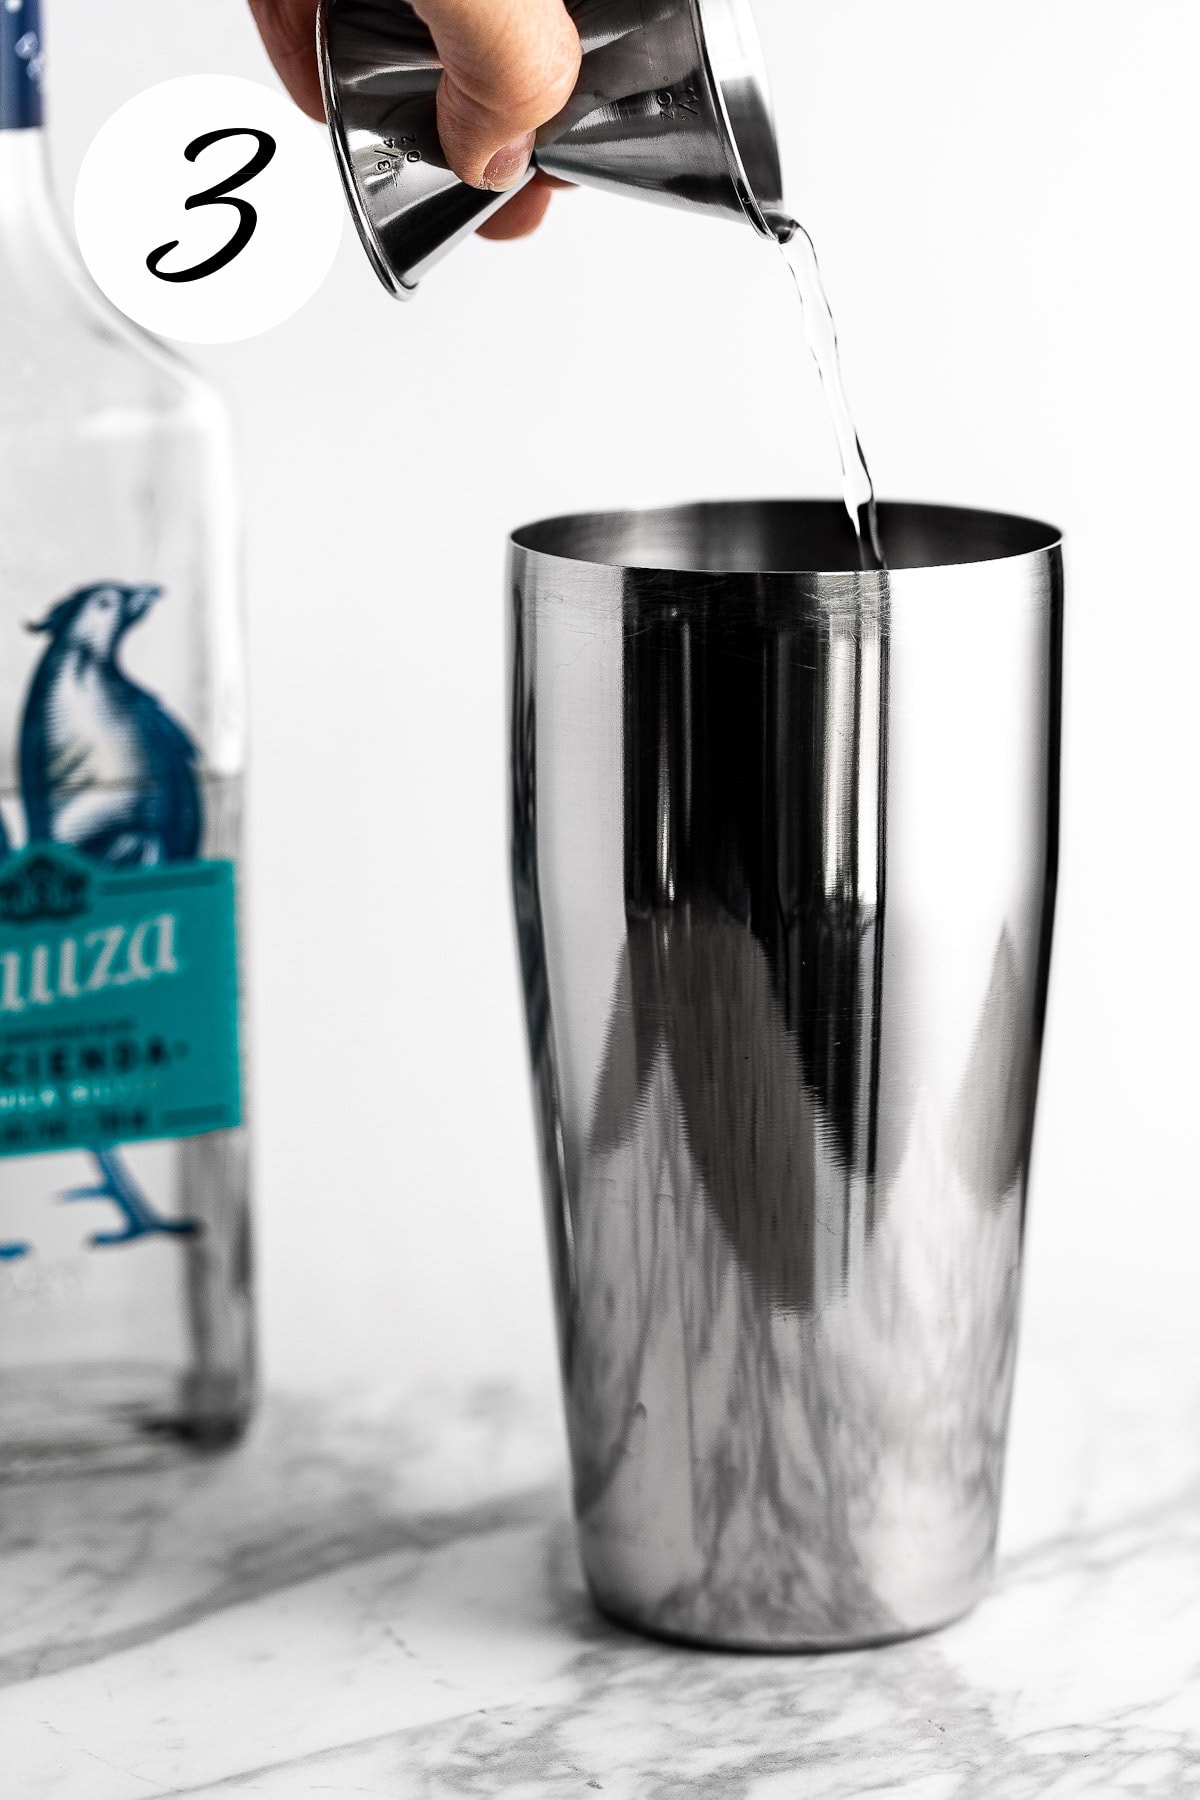 A process photo illustrating step 3: Tequila being poured into a cocktail shaker.